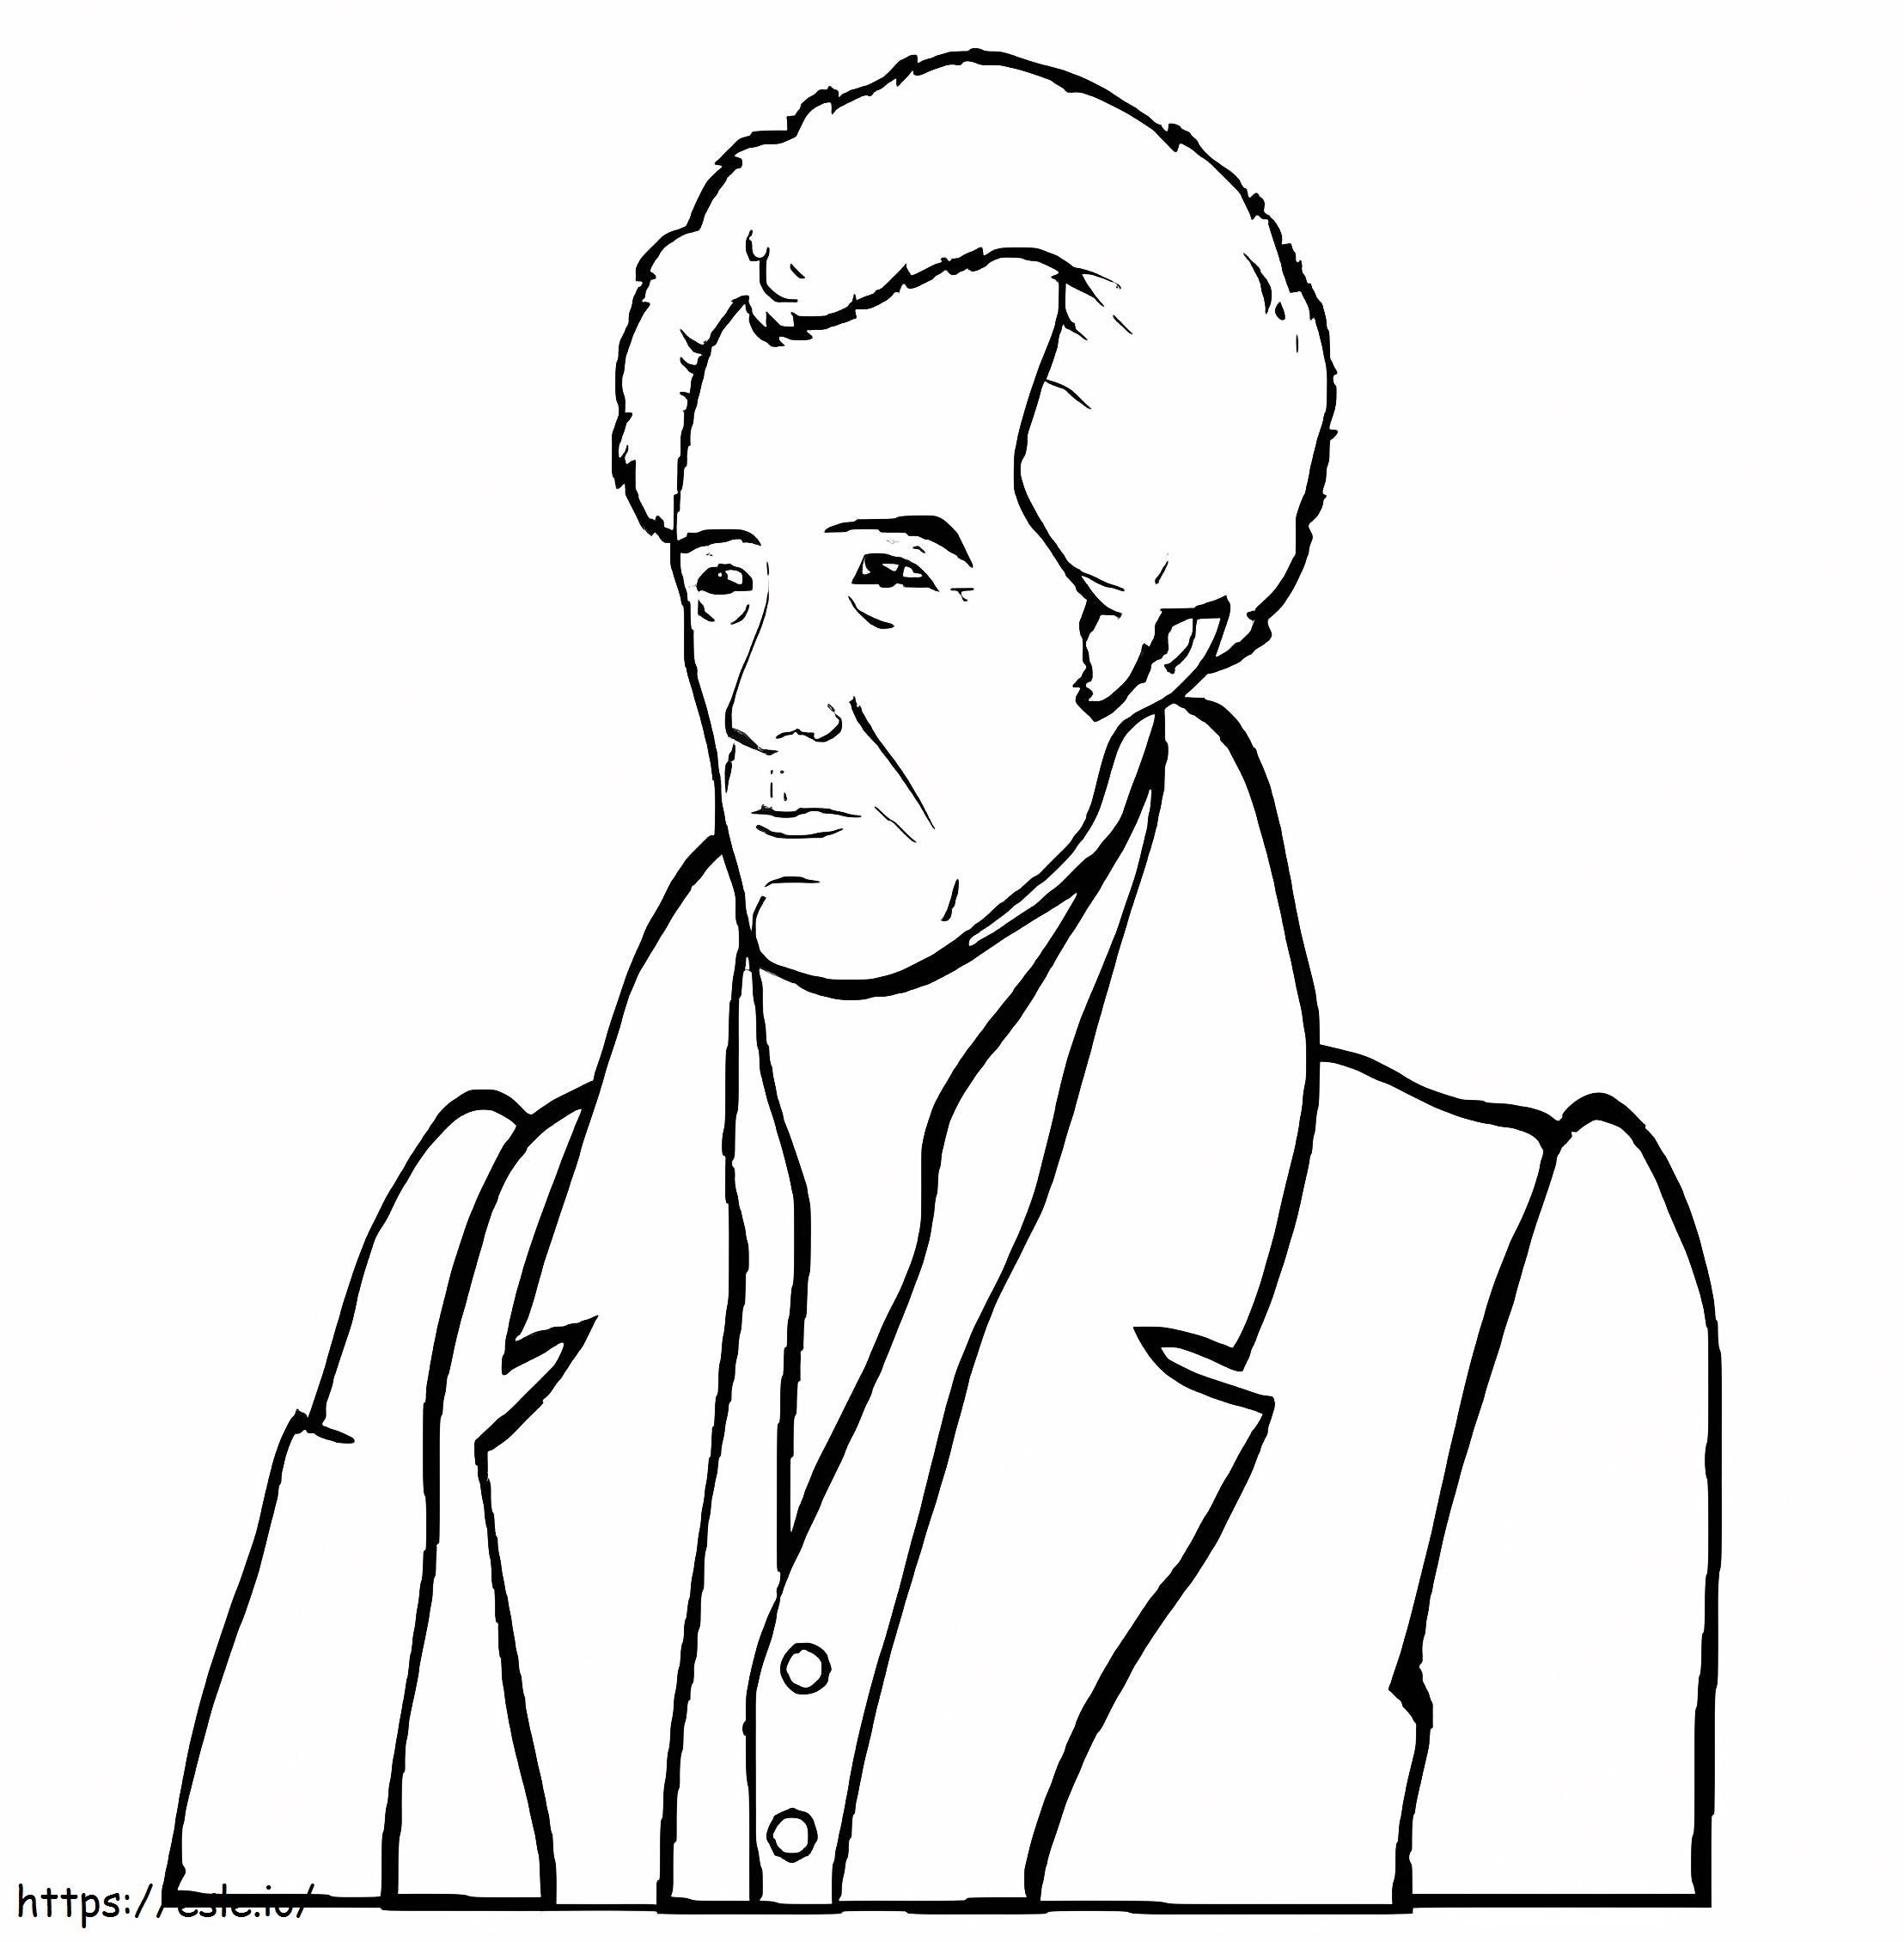 Andrew Jackson 7 coloring page